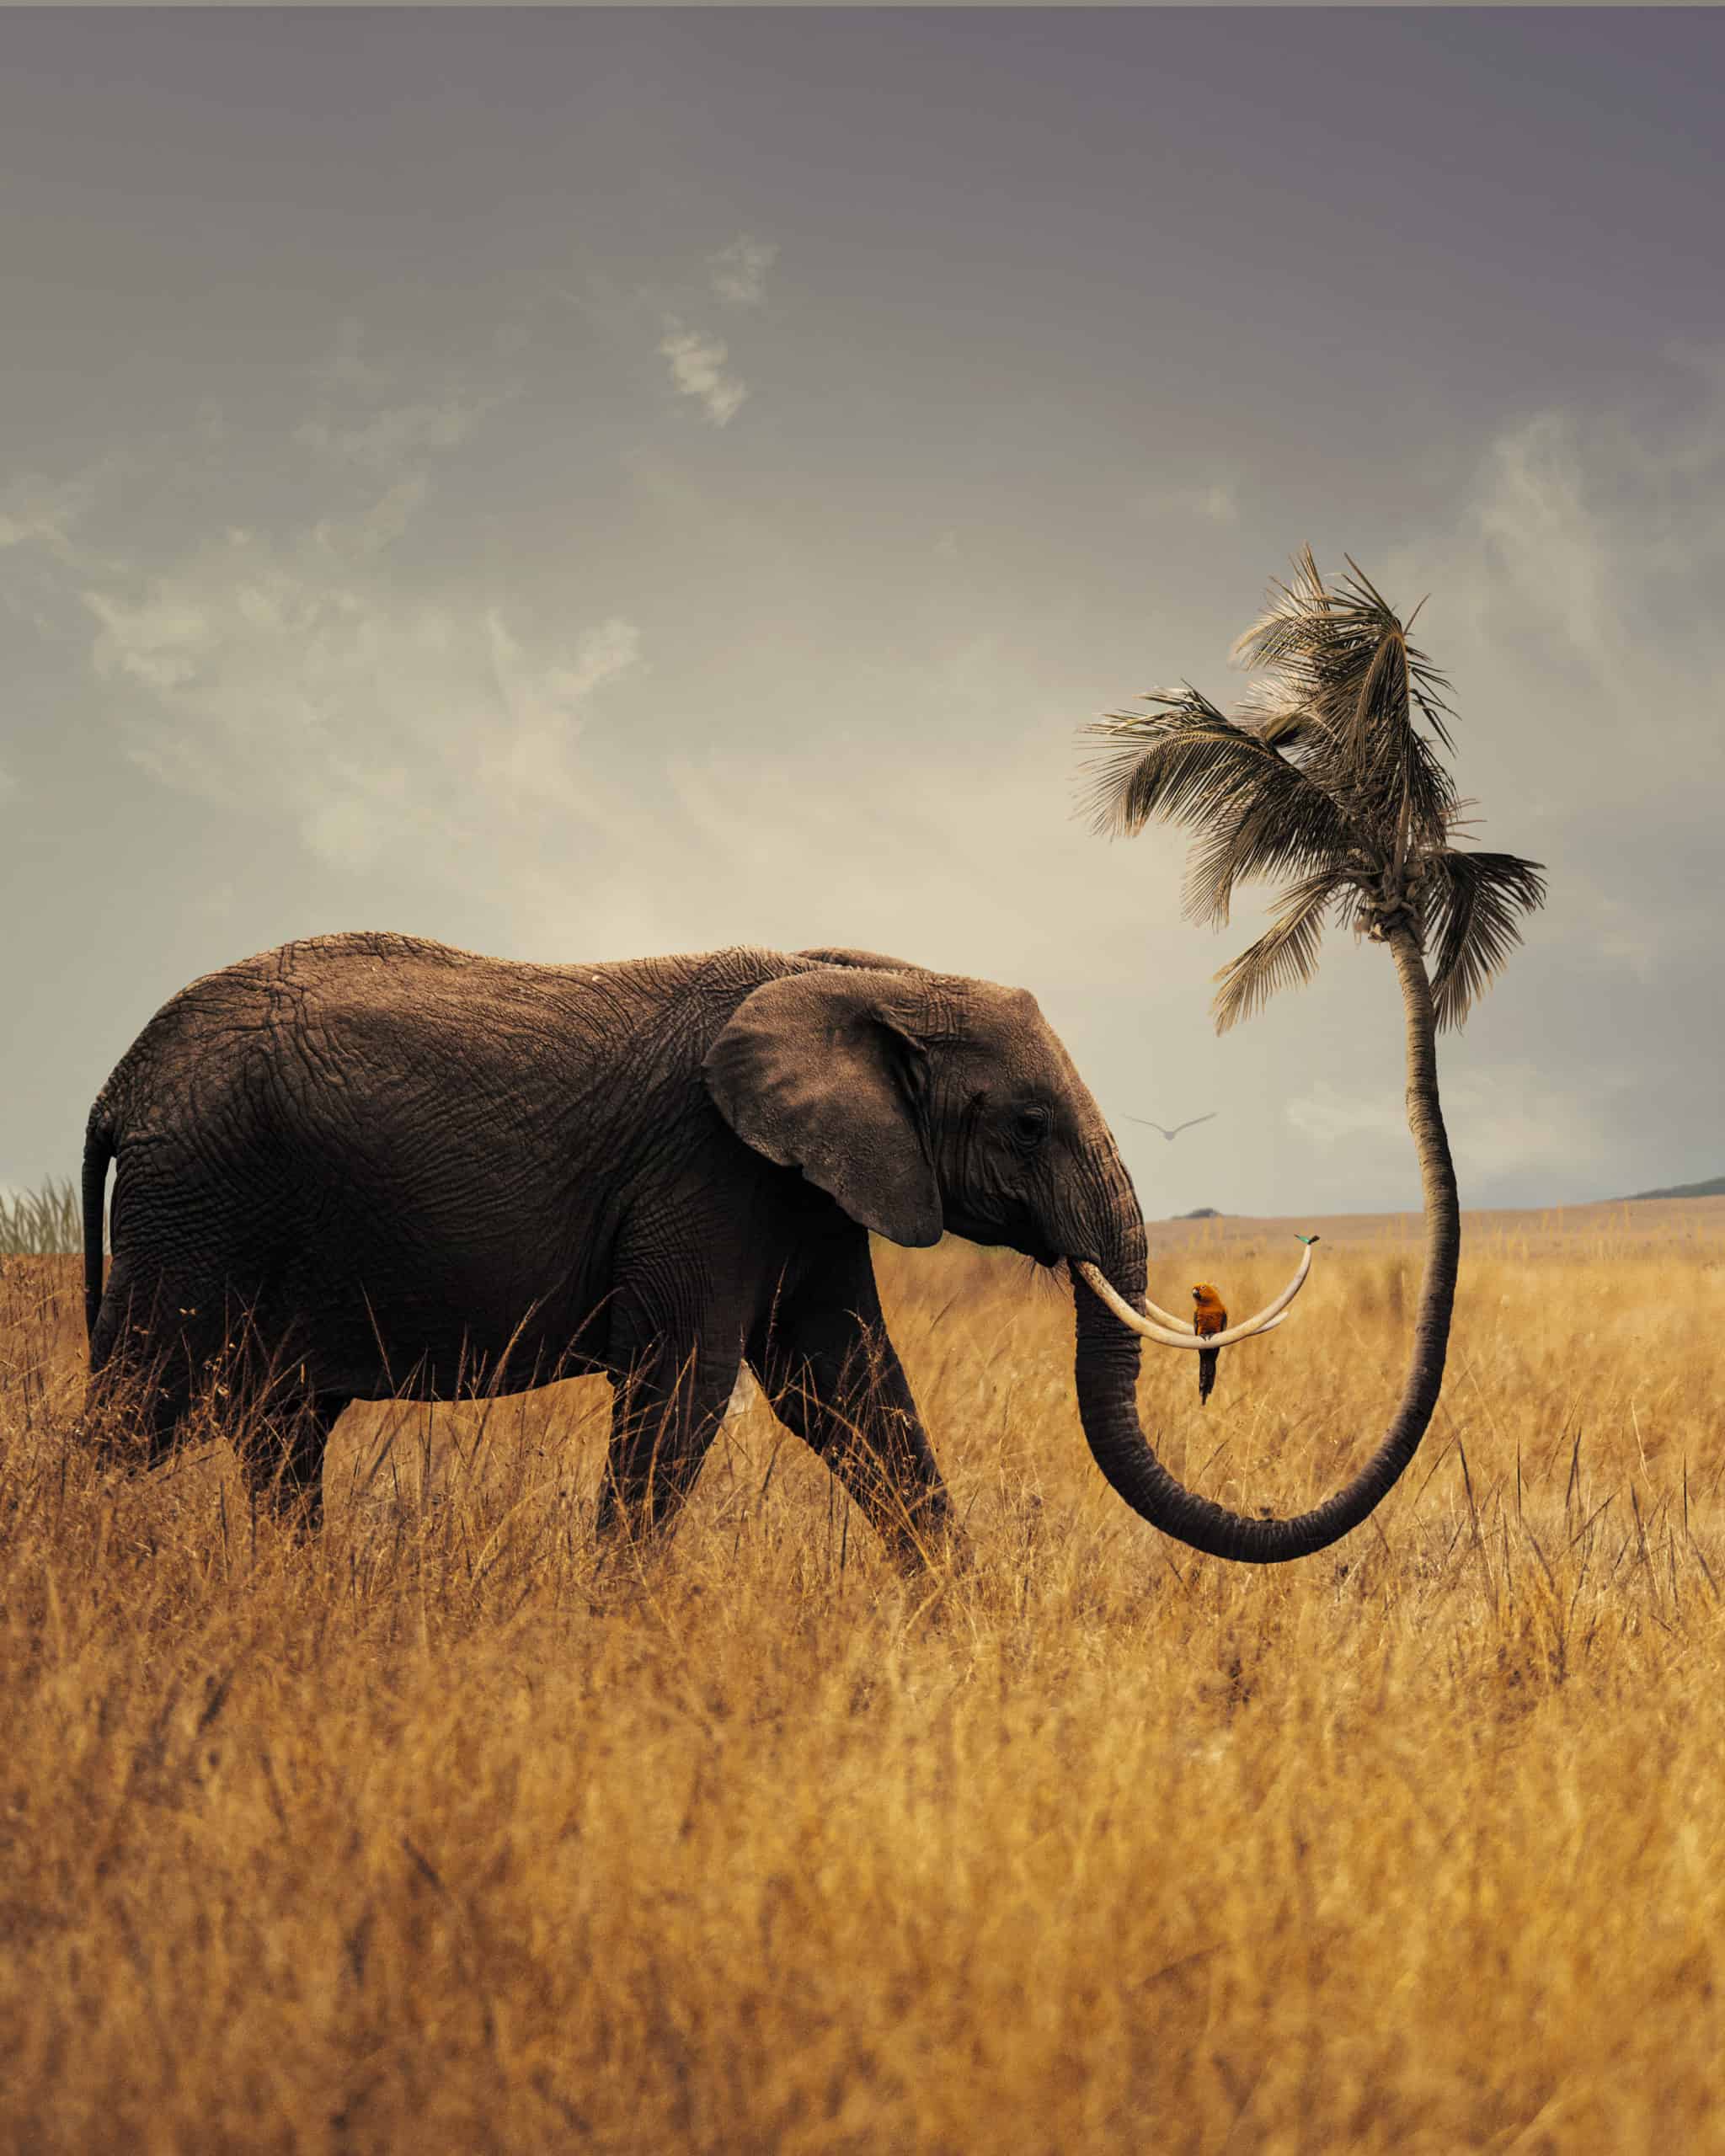 Learn How to Create a Surreal Scene of Elephant with a Palm Trunk